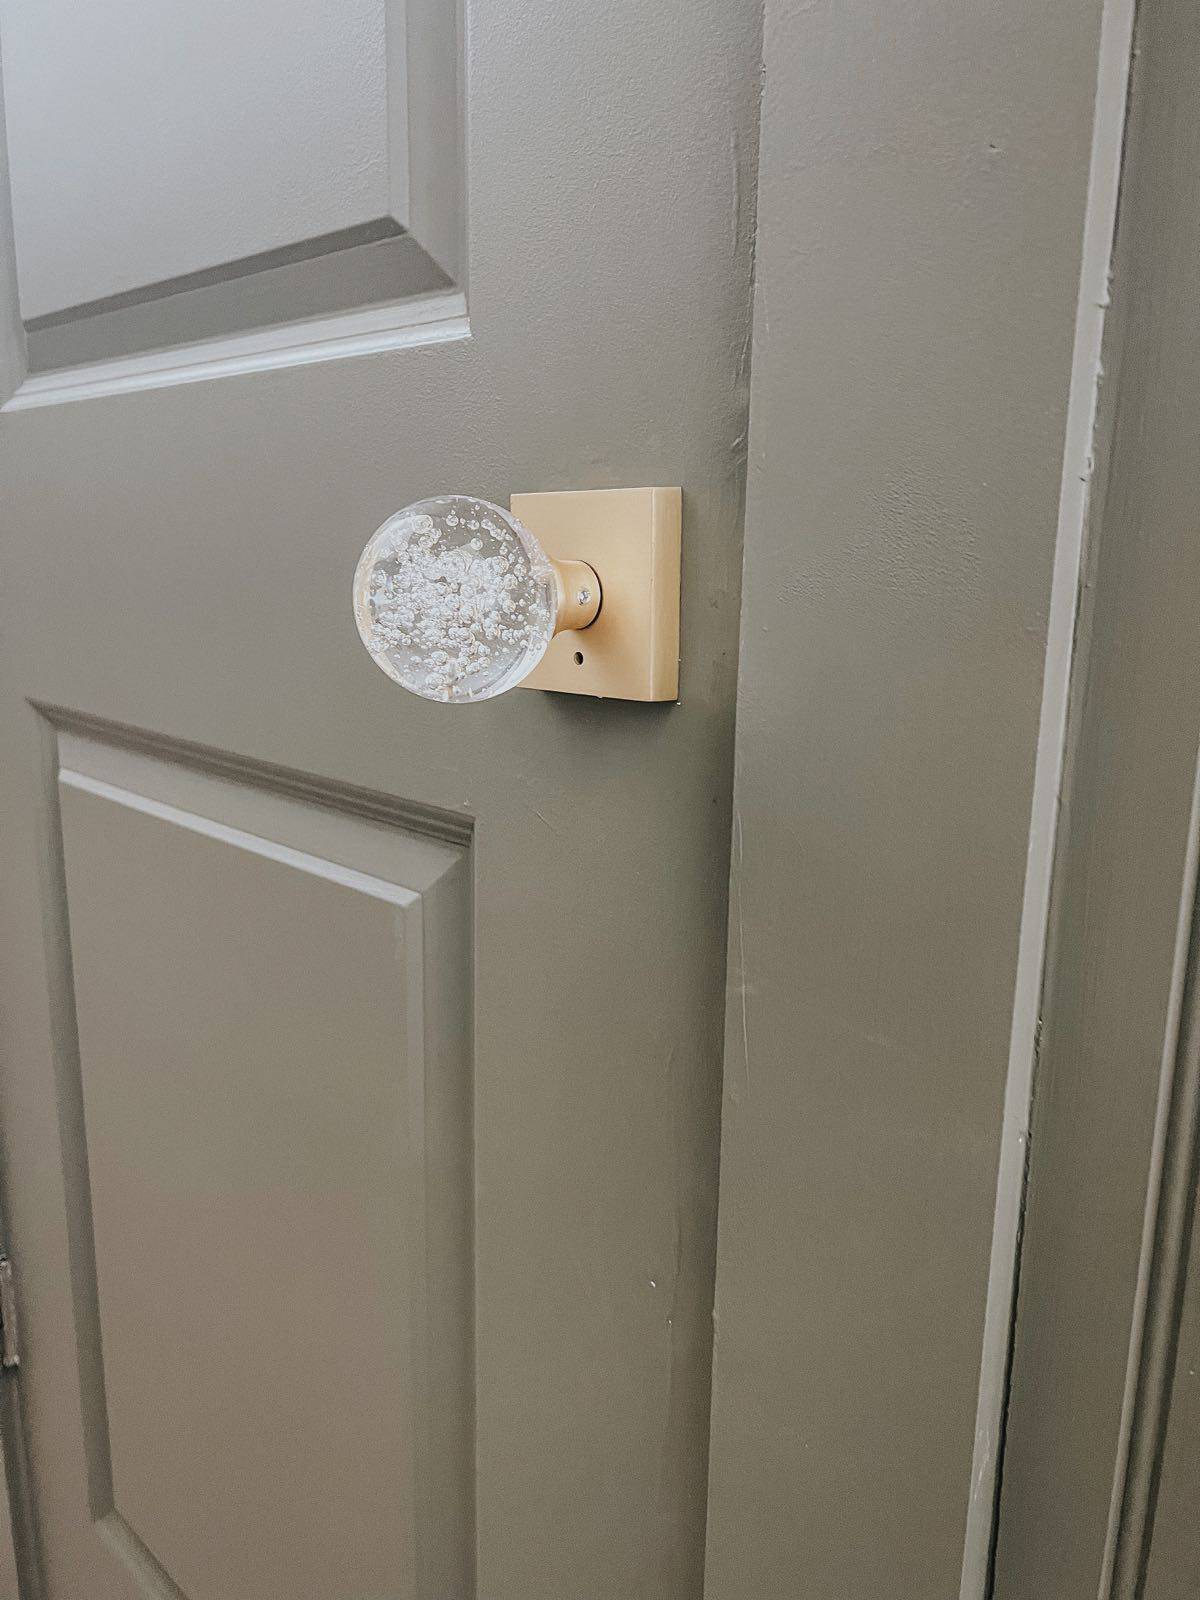 How to Change a Doorknob and Replace It